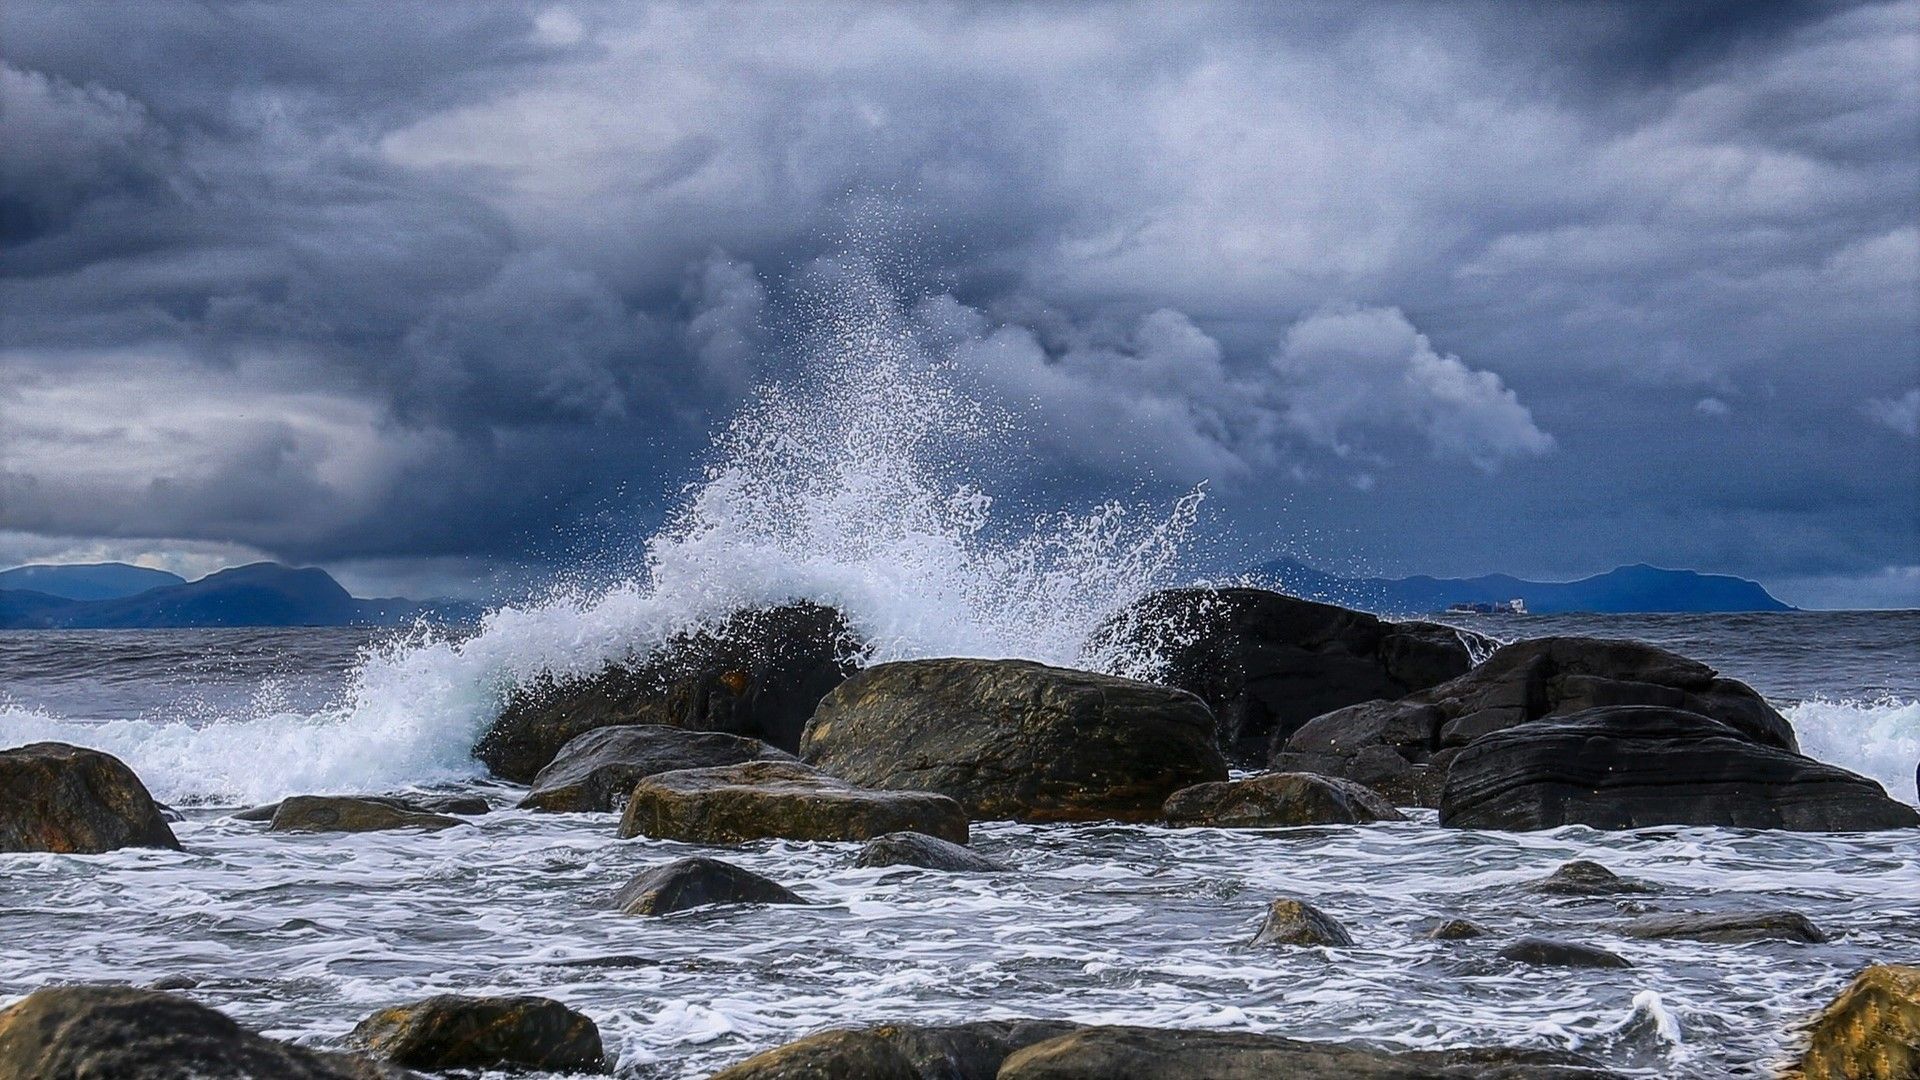 Dark Clouds over Rough Sea HD Wallpaper. Background Image